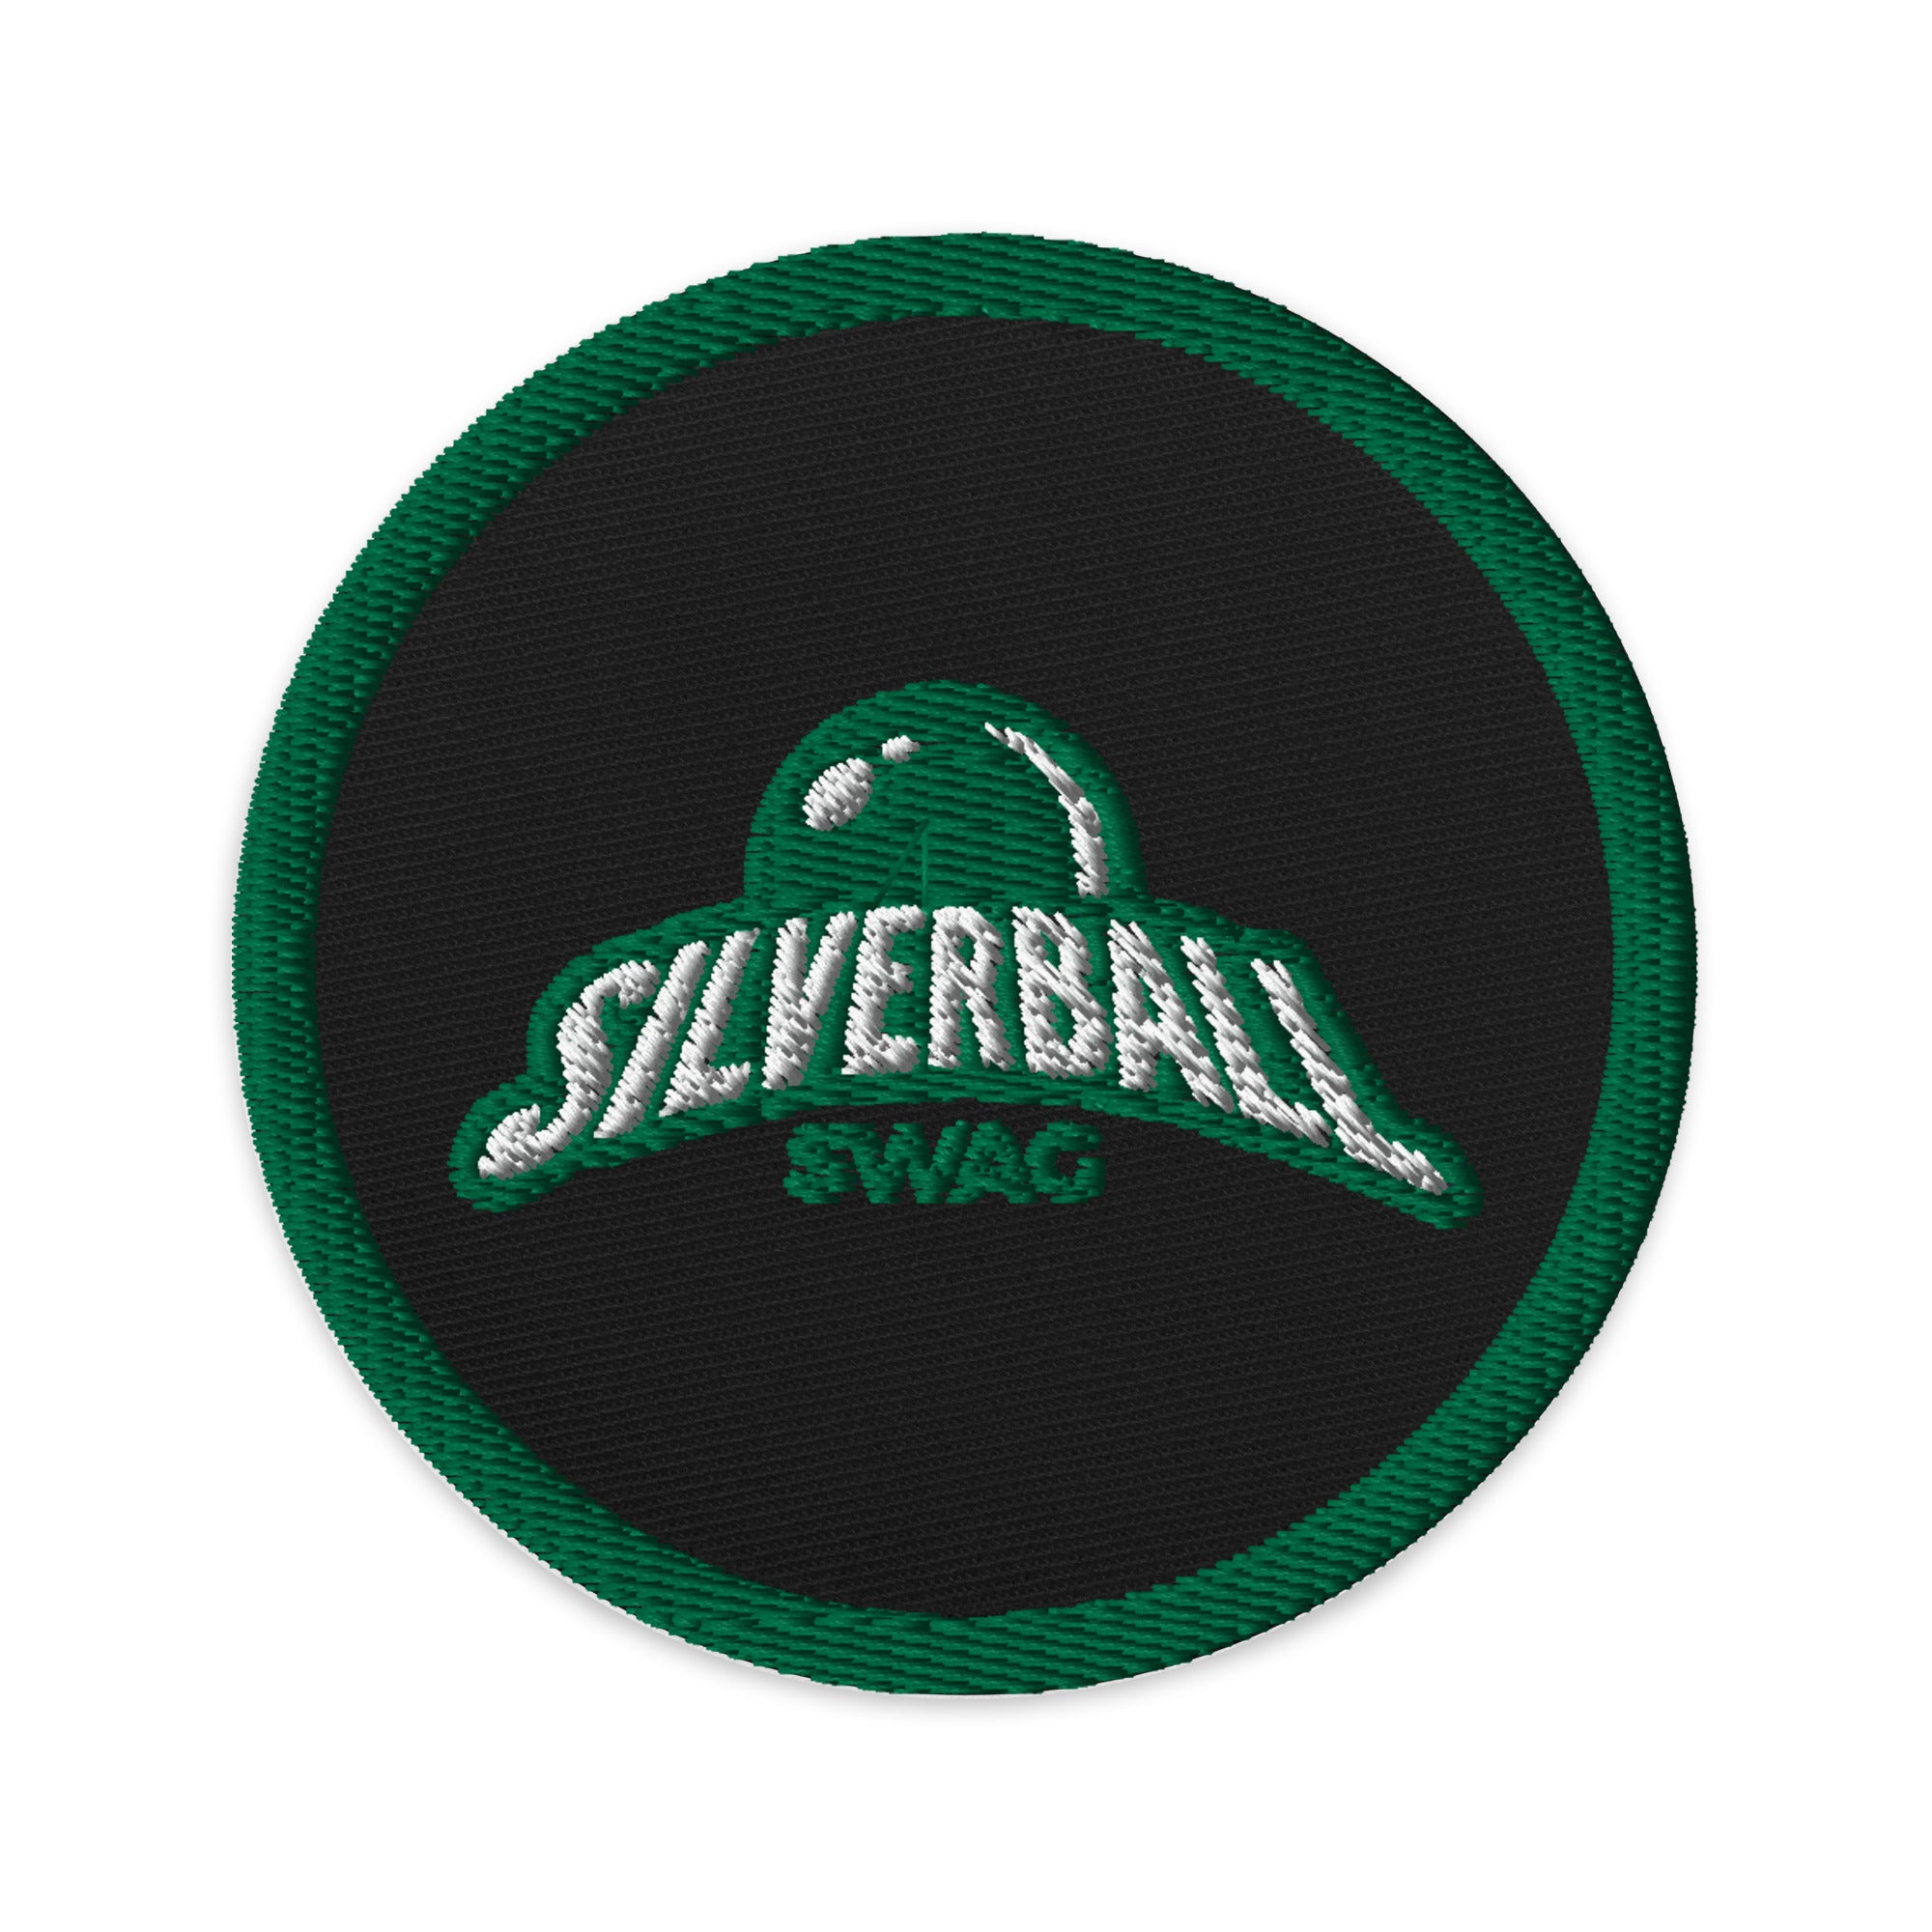 Silverball Swag - Embroidered Circle Patch (multiple colors available)